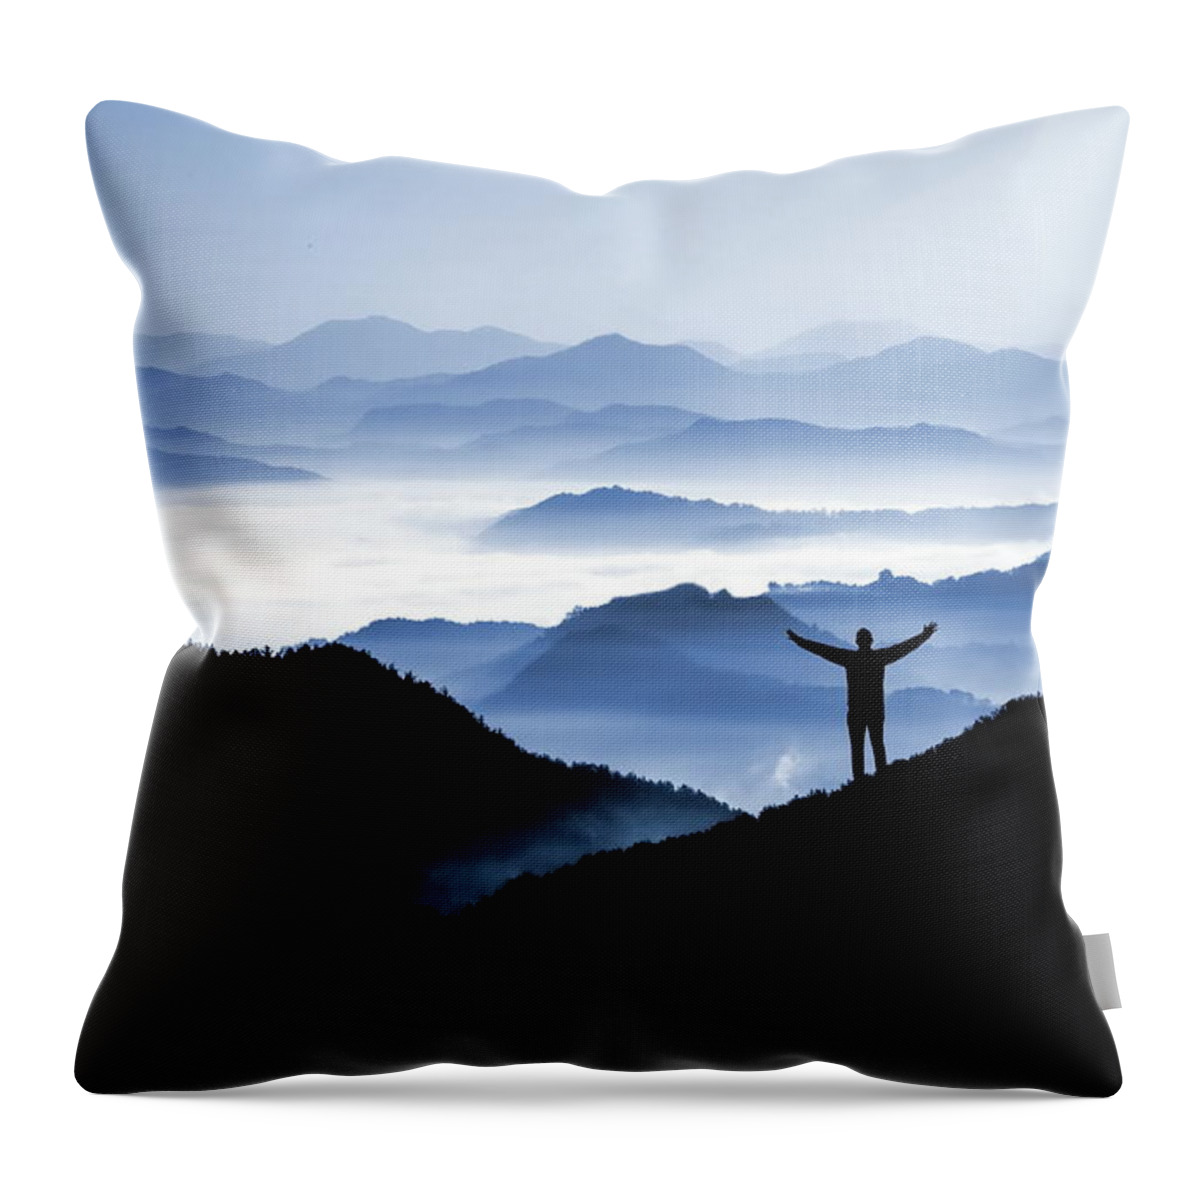 Adoration Throw Pillow featuring the photograph Adoration of Natural Beauty by Andrea Kollo